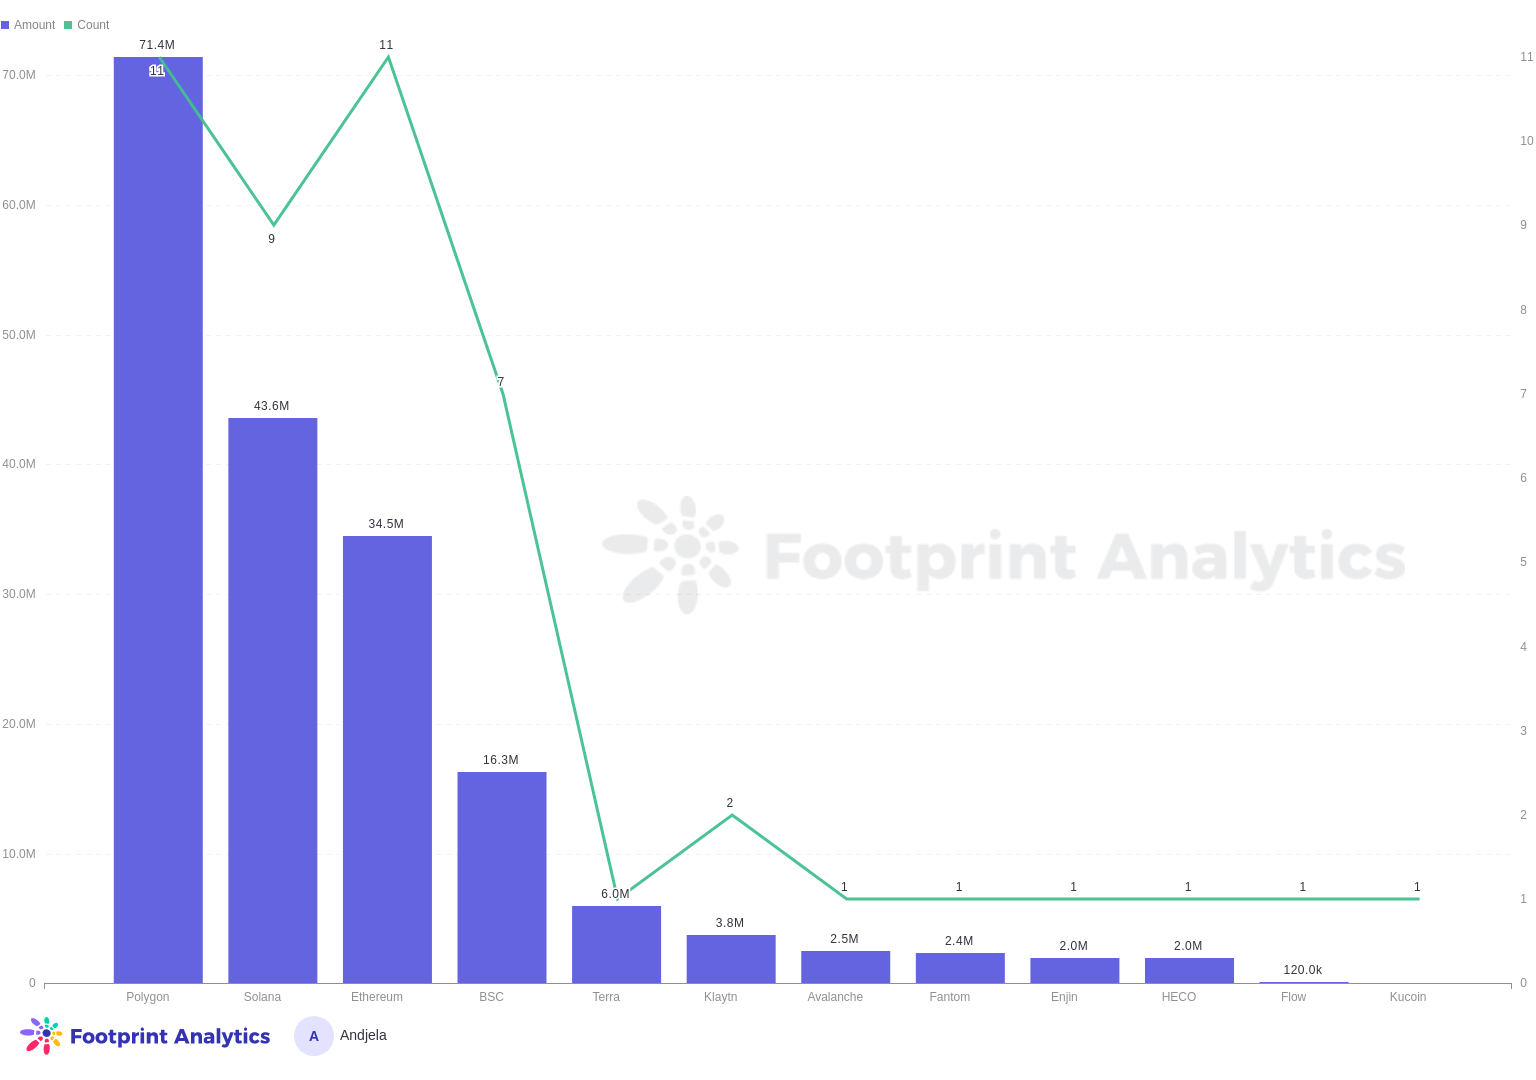 Fundraising distribution by chain (Source: Footprint Analytics)